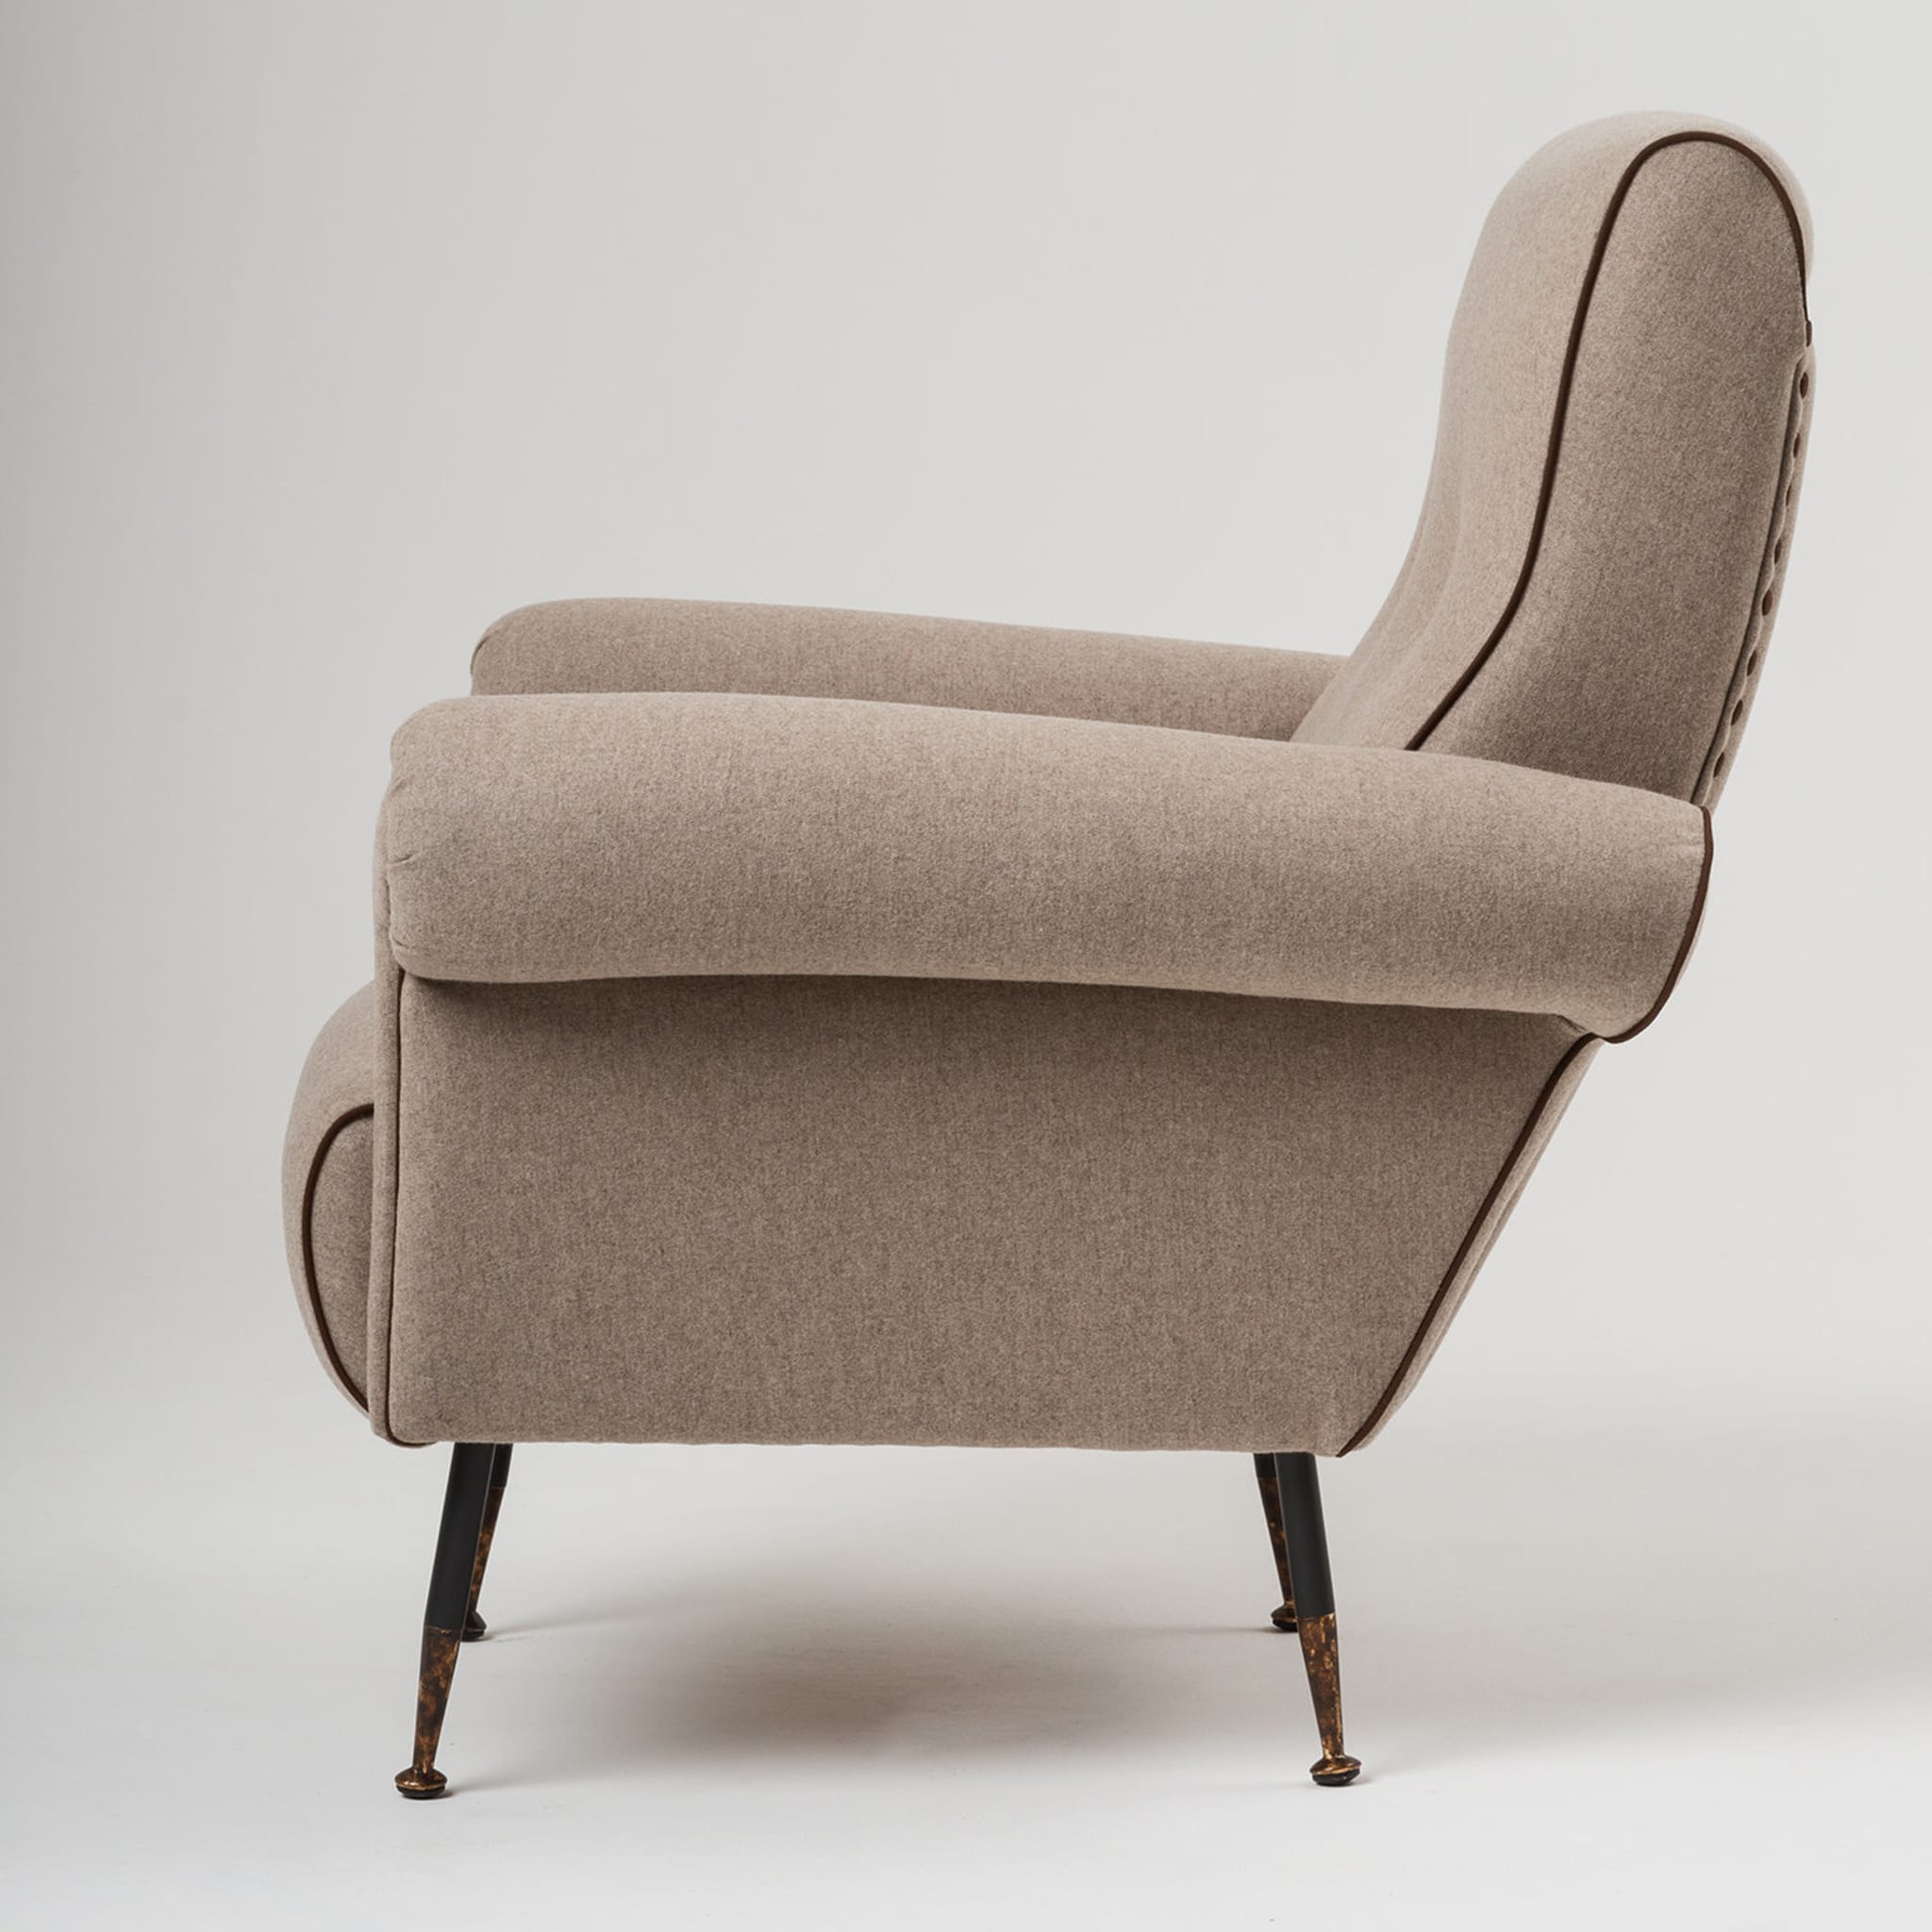 Pulce Armchair Tribeca Collection by Marco and Giulio Mantellassi - Alternative view 2